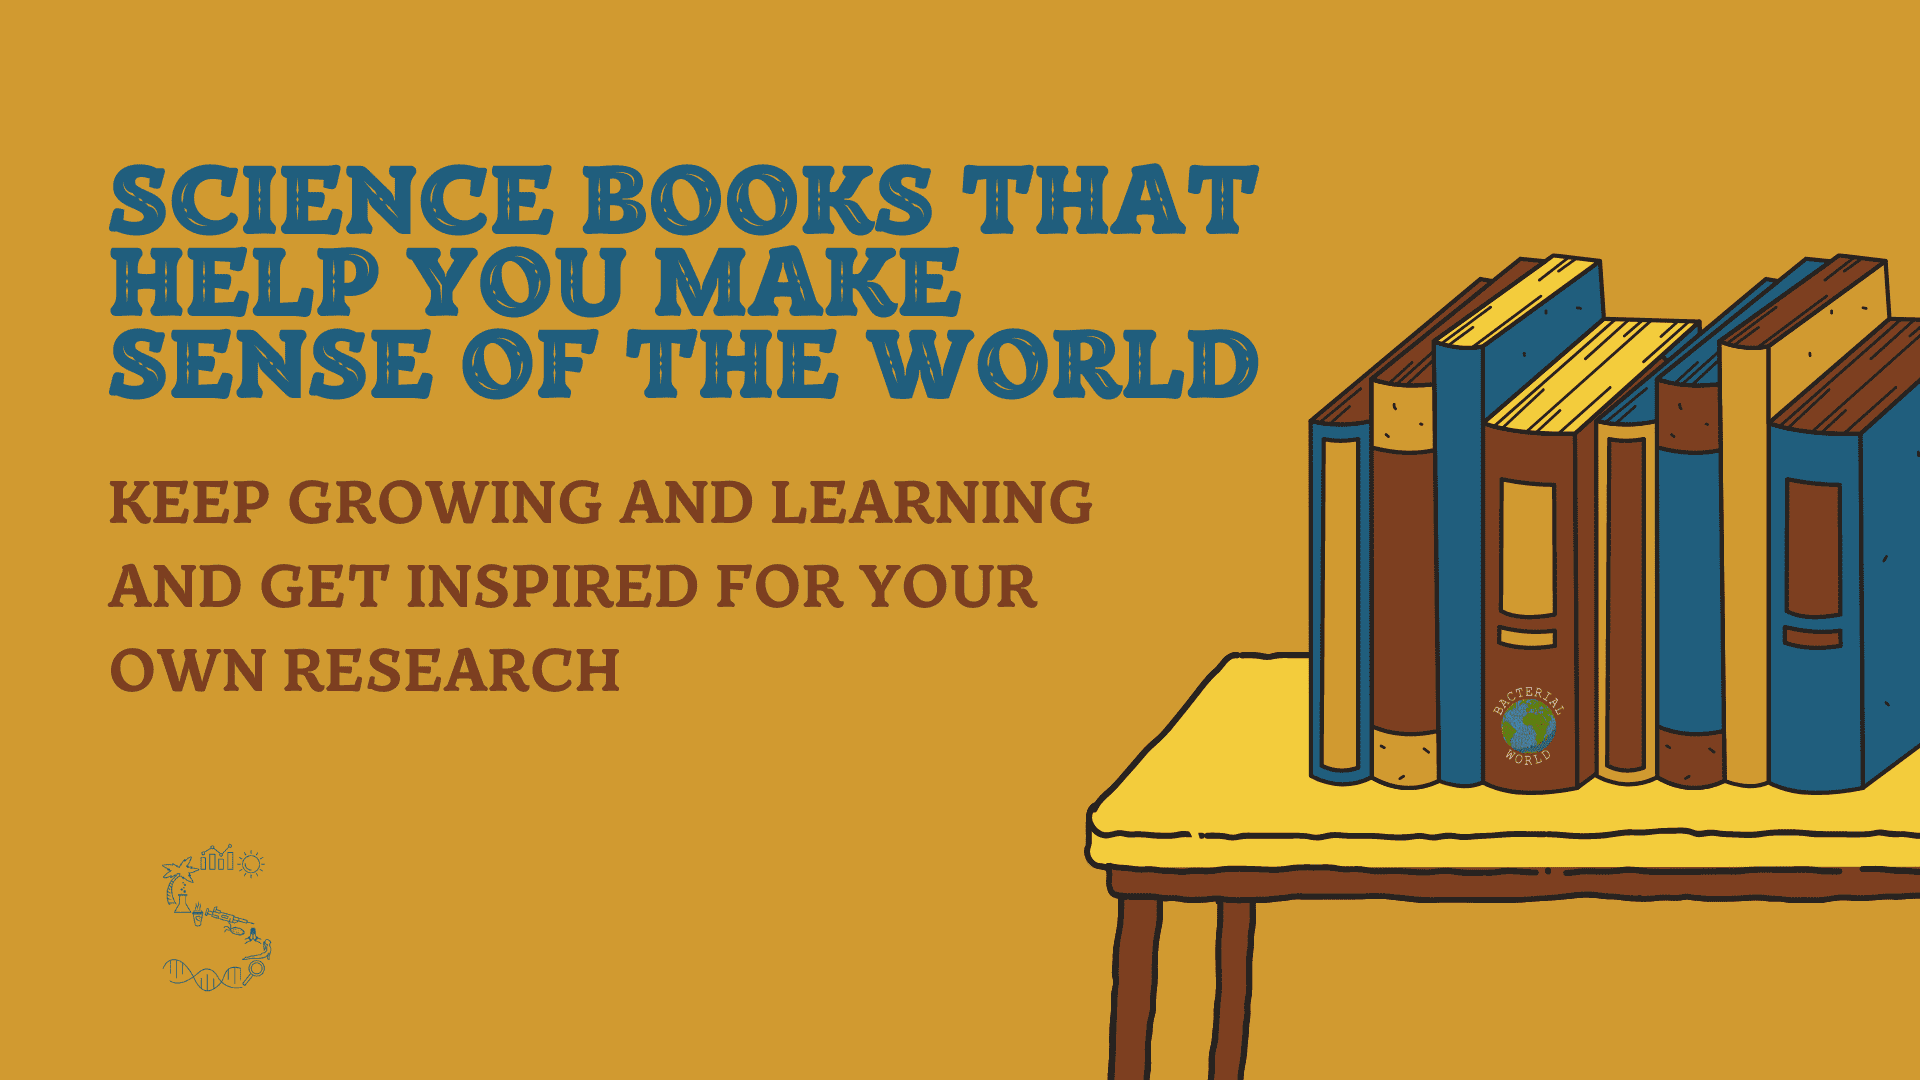 Popular science books for adults to help you make sense of the world